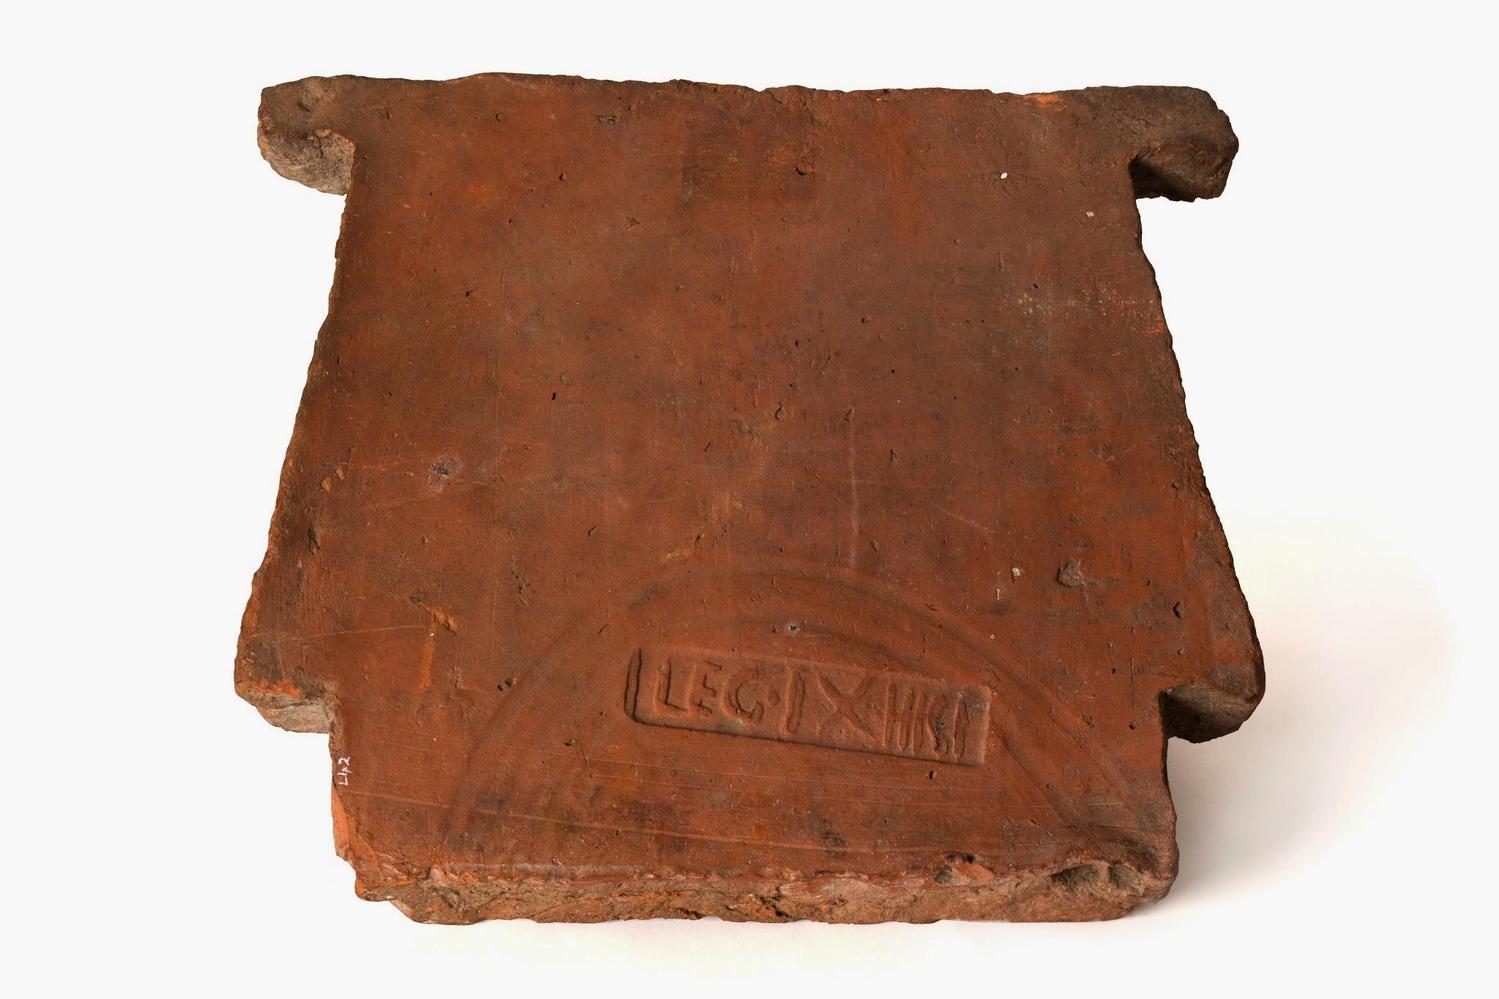 Ceramic tile "Armchair Voussoir type 3b". Use in the construction of vaulted ceilings. Stamped LEG.IX HISP. Discovered at Hilly Wood, Bainton in 1867. PETMG:L42A. Image: Peterborough Museum and Art Gallery